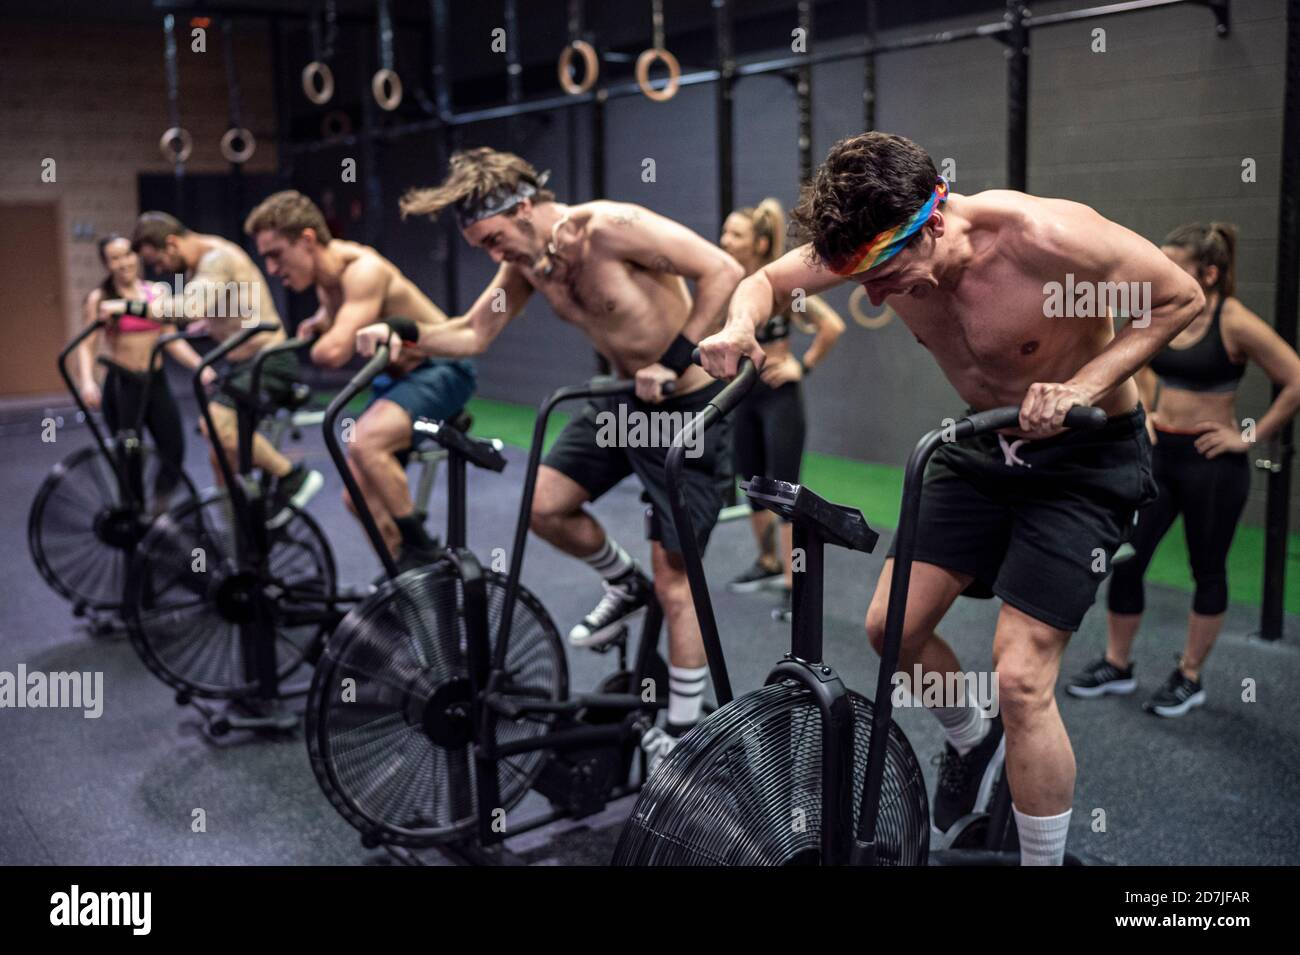 Athletes cycling on exercise bike with women standing in background at gym Stock Photo